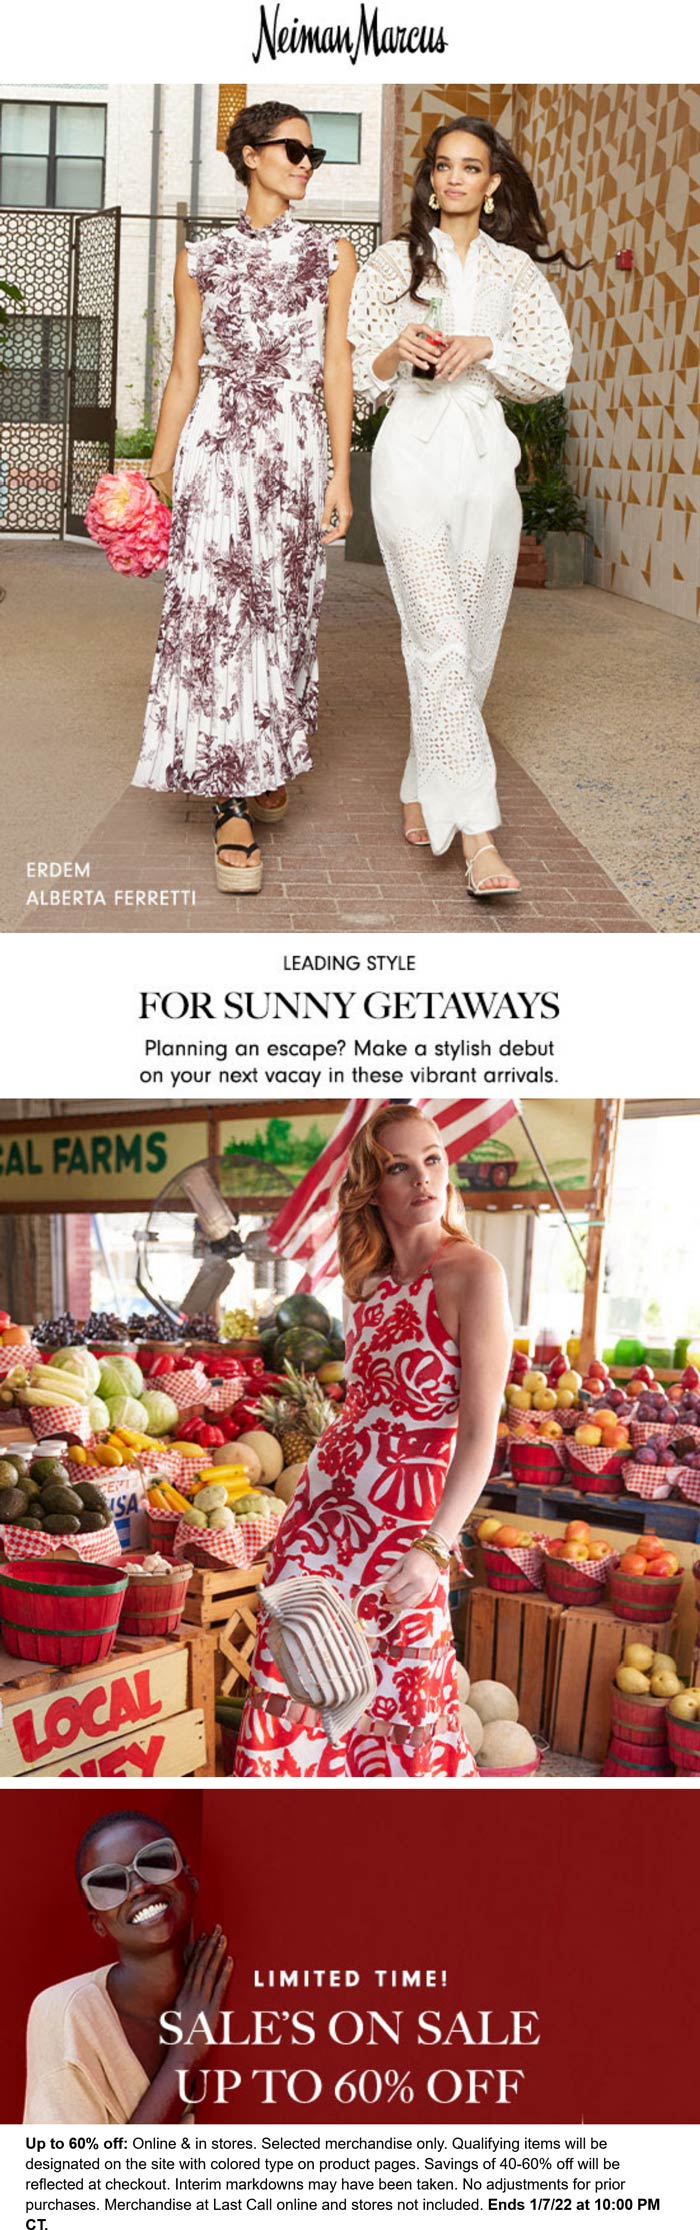 Neiman Marcus stores Coupon  40-60% off clearance at Neiman Marcus, ditto online #neimanmarcus 